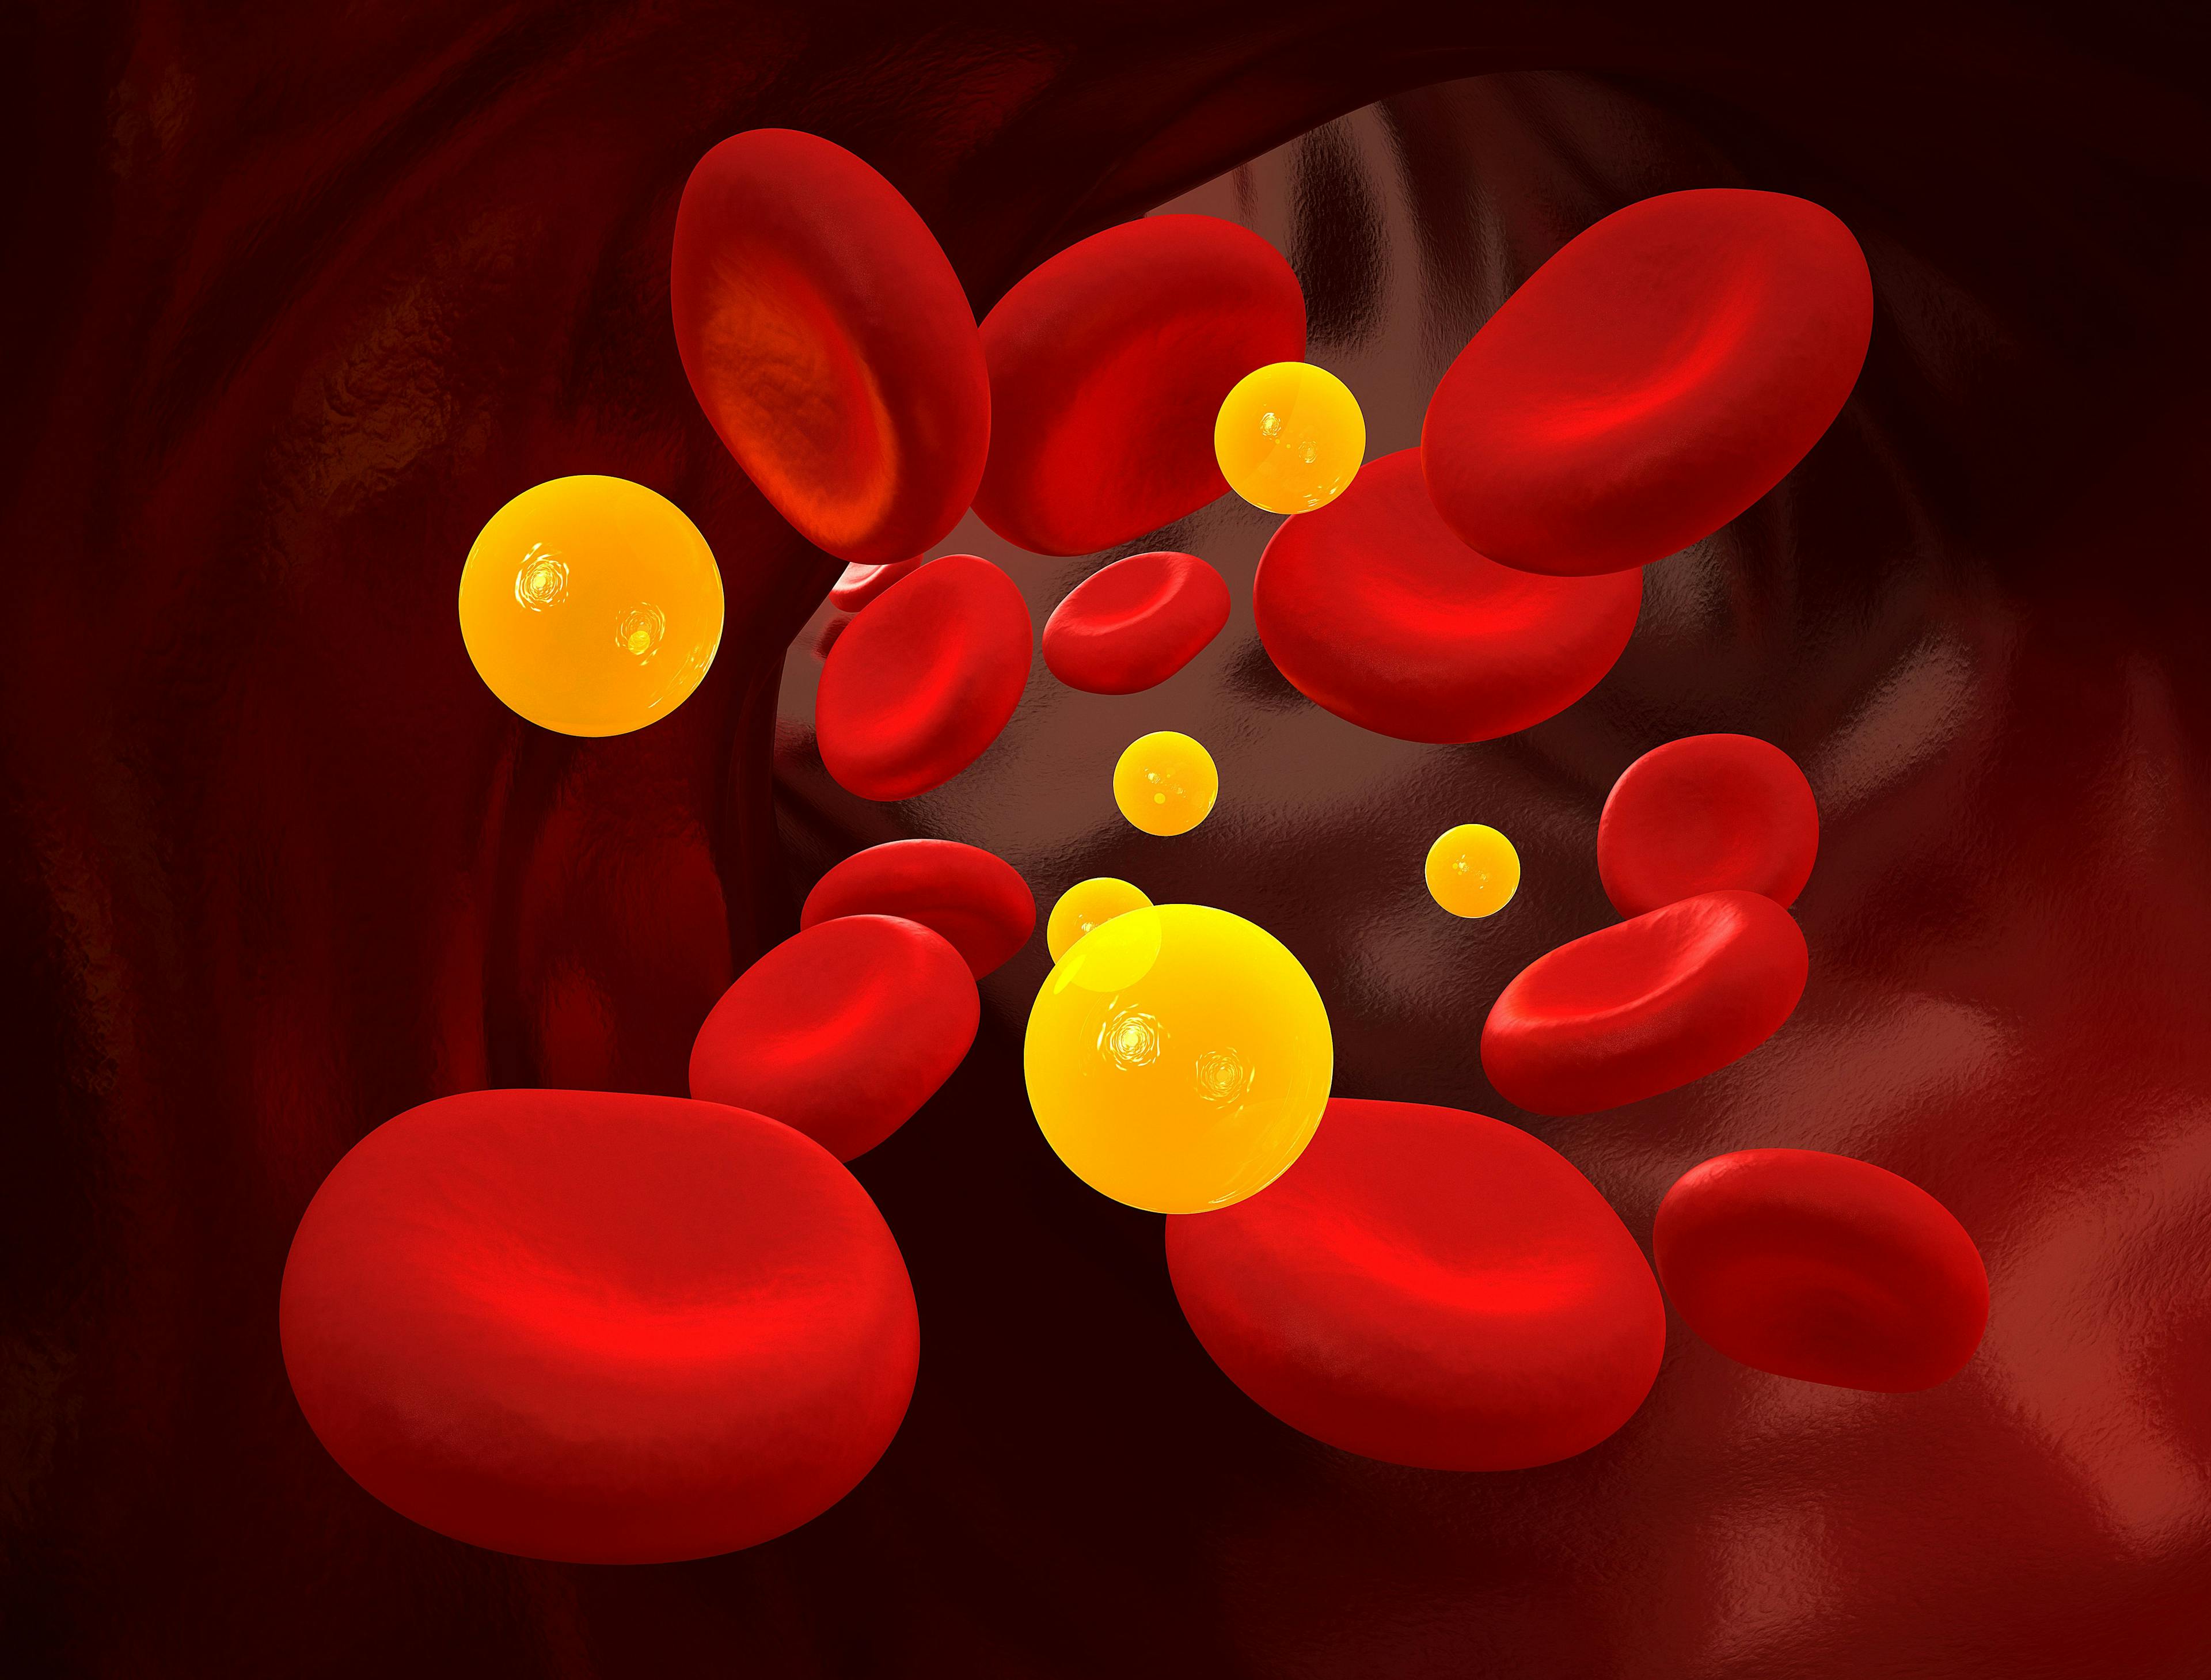 Digitial illustration of lipid disorders in the blood stream. | Credit: Fotolia